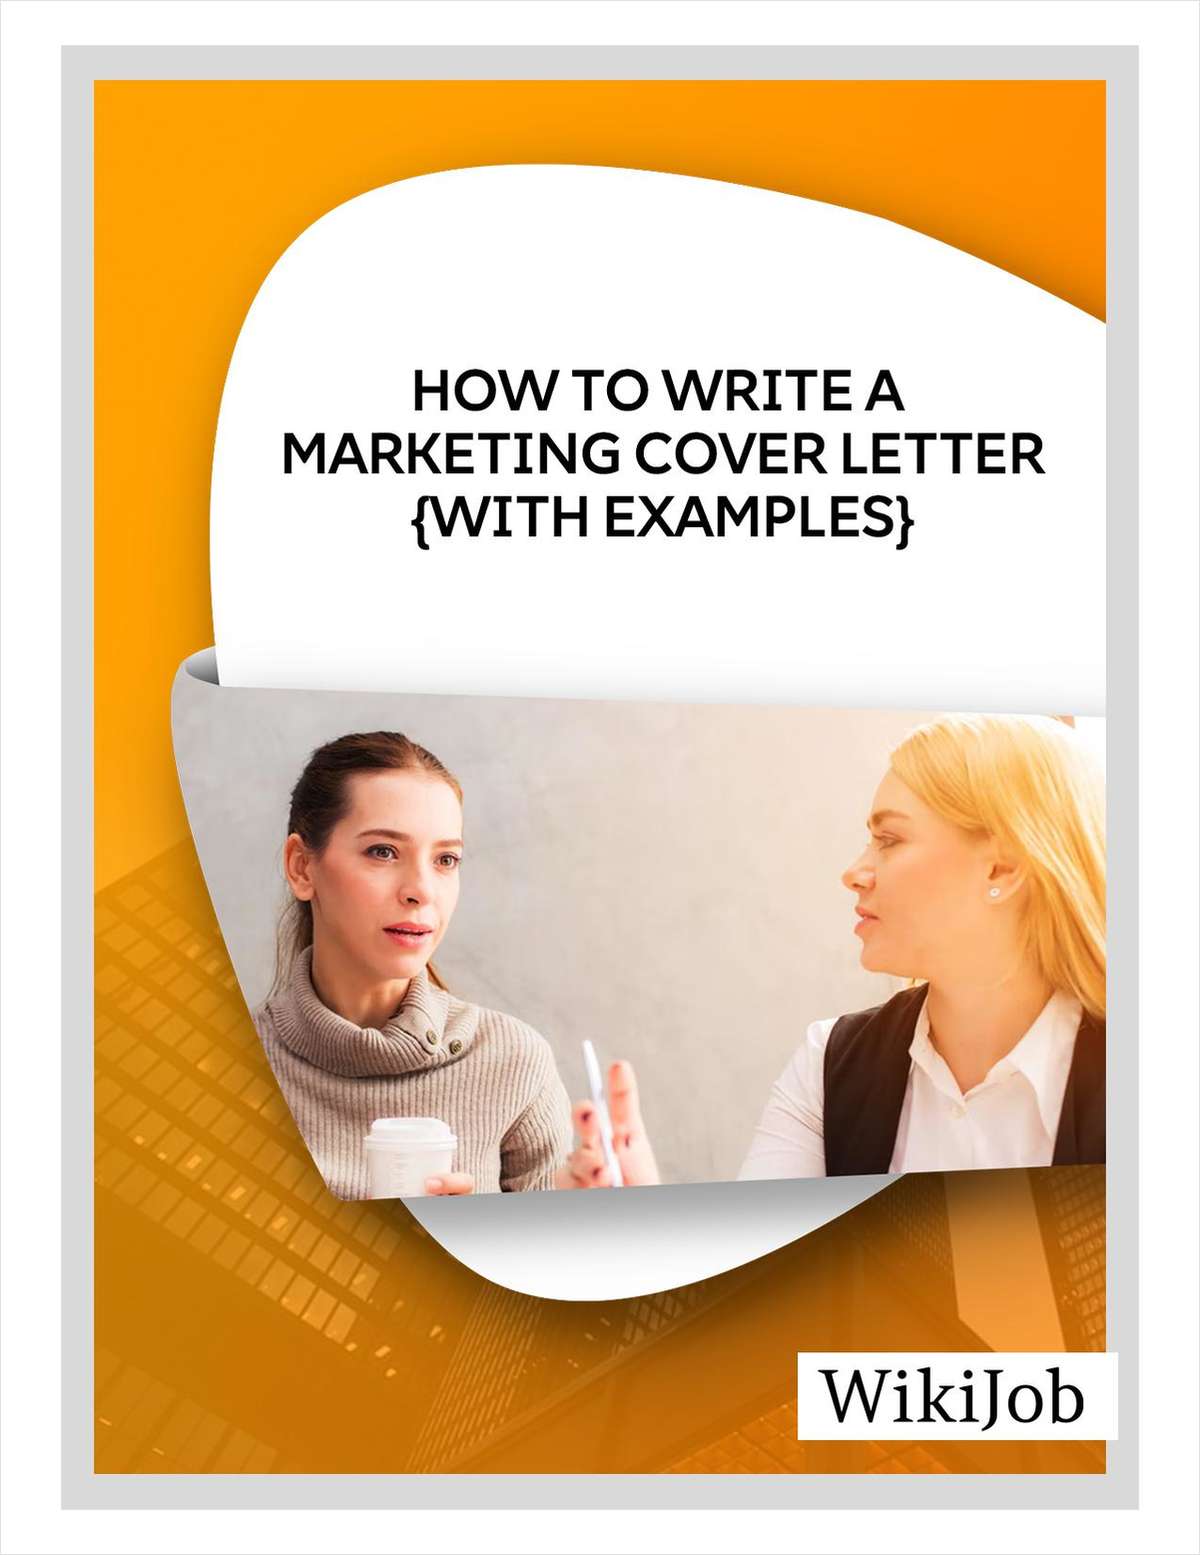 How to Write a Marketing Cover Letter